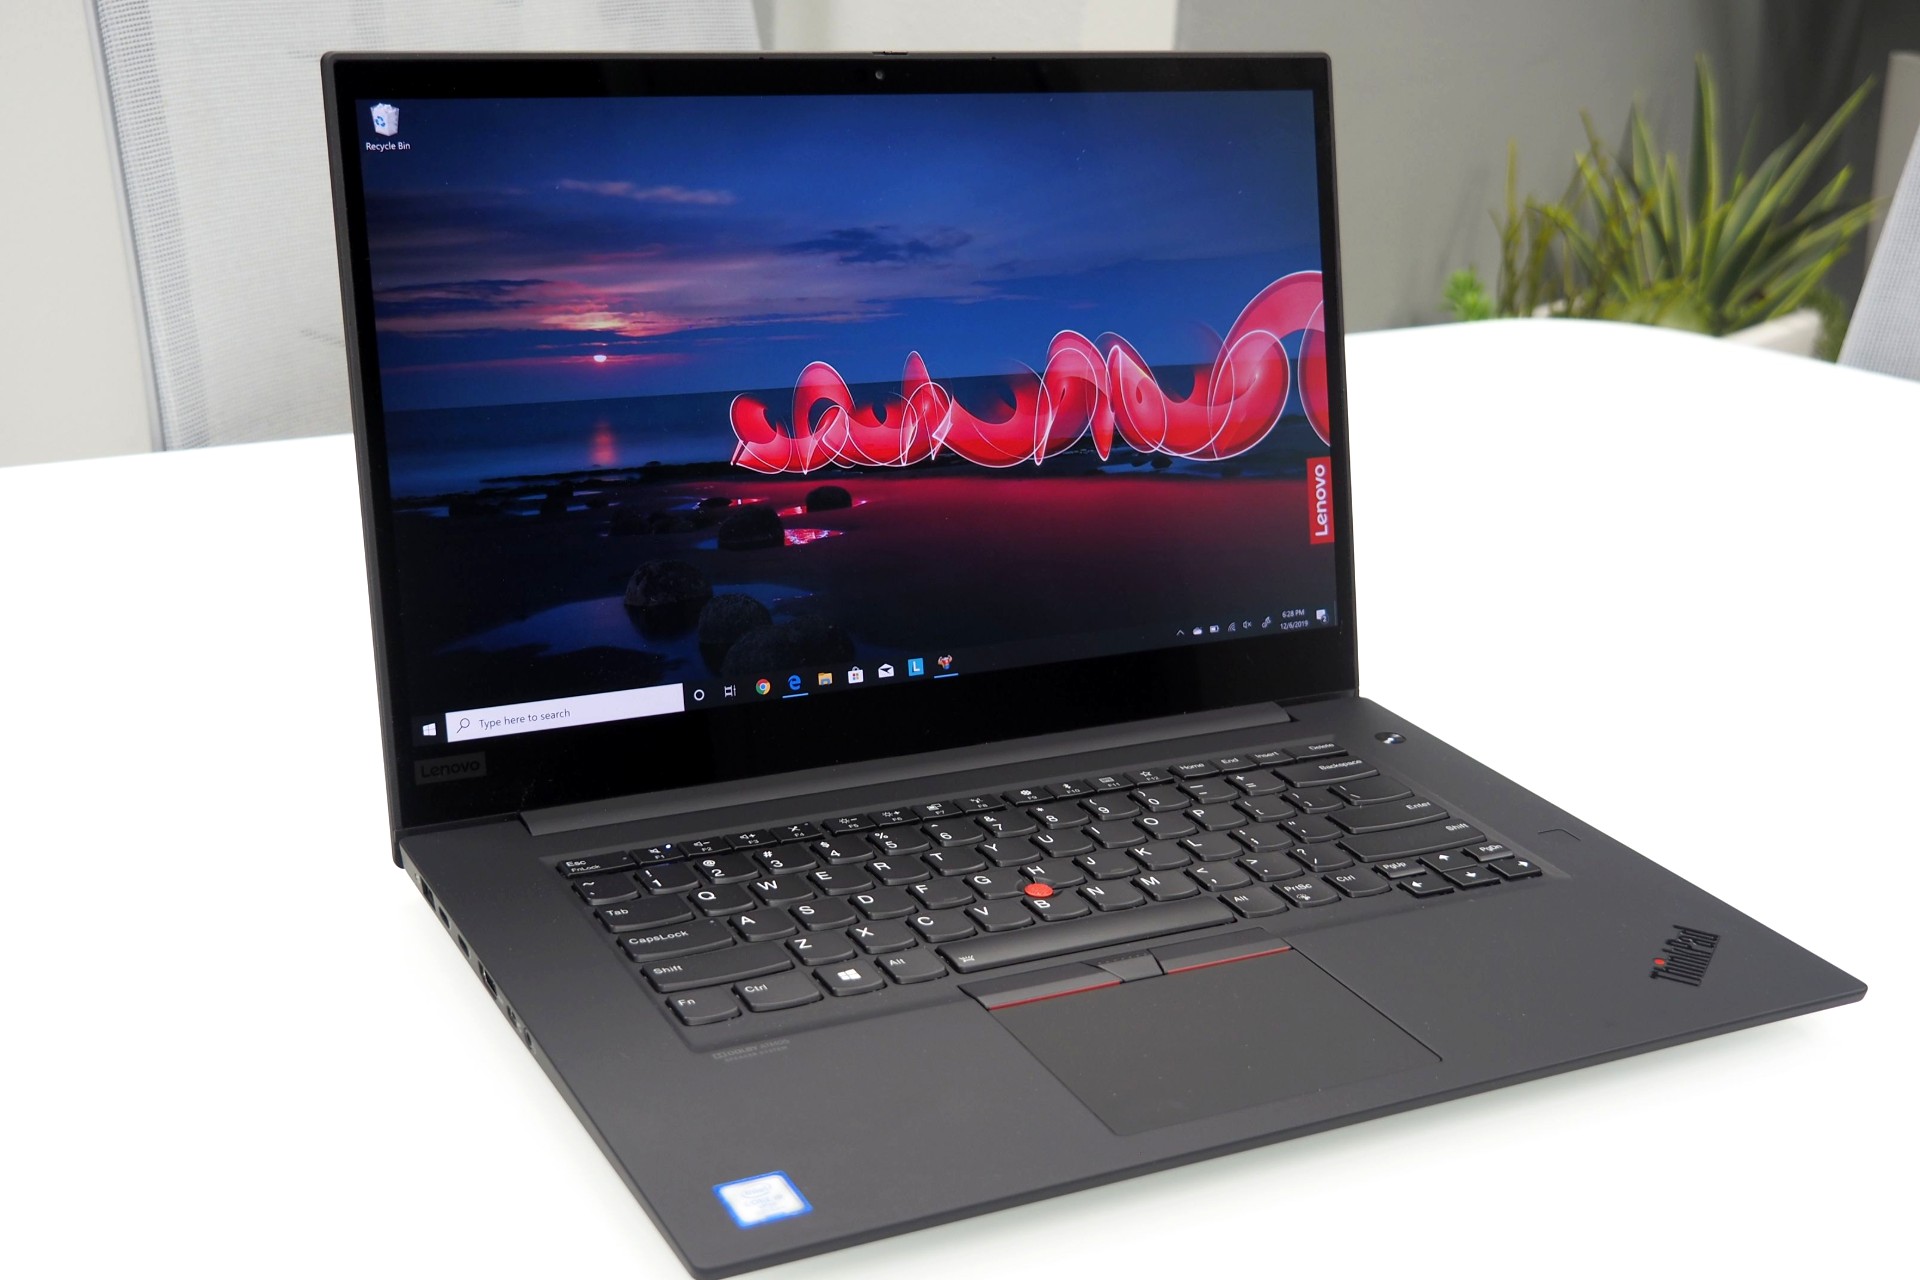 Lenovo ThinkPad X1 Extreme Gen 2 Review: Not Your Dad's ThinkPad